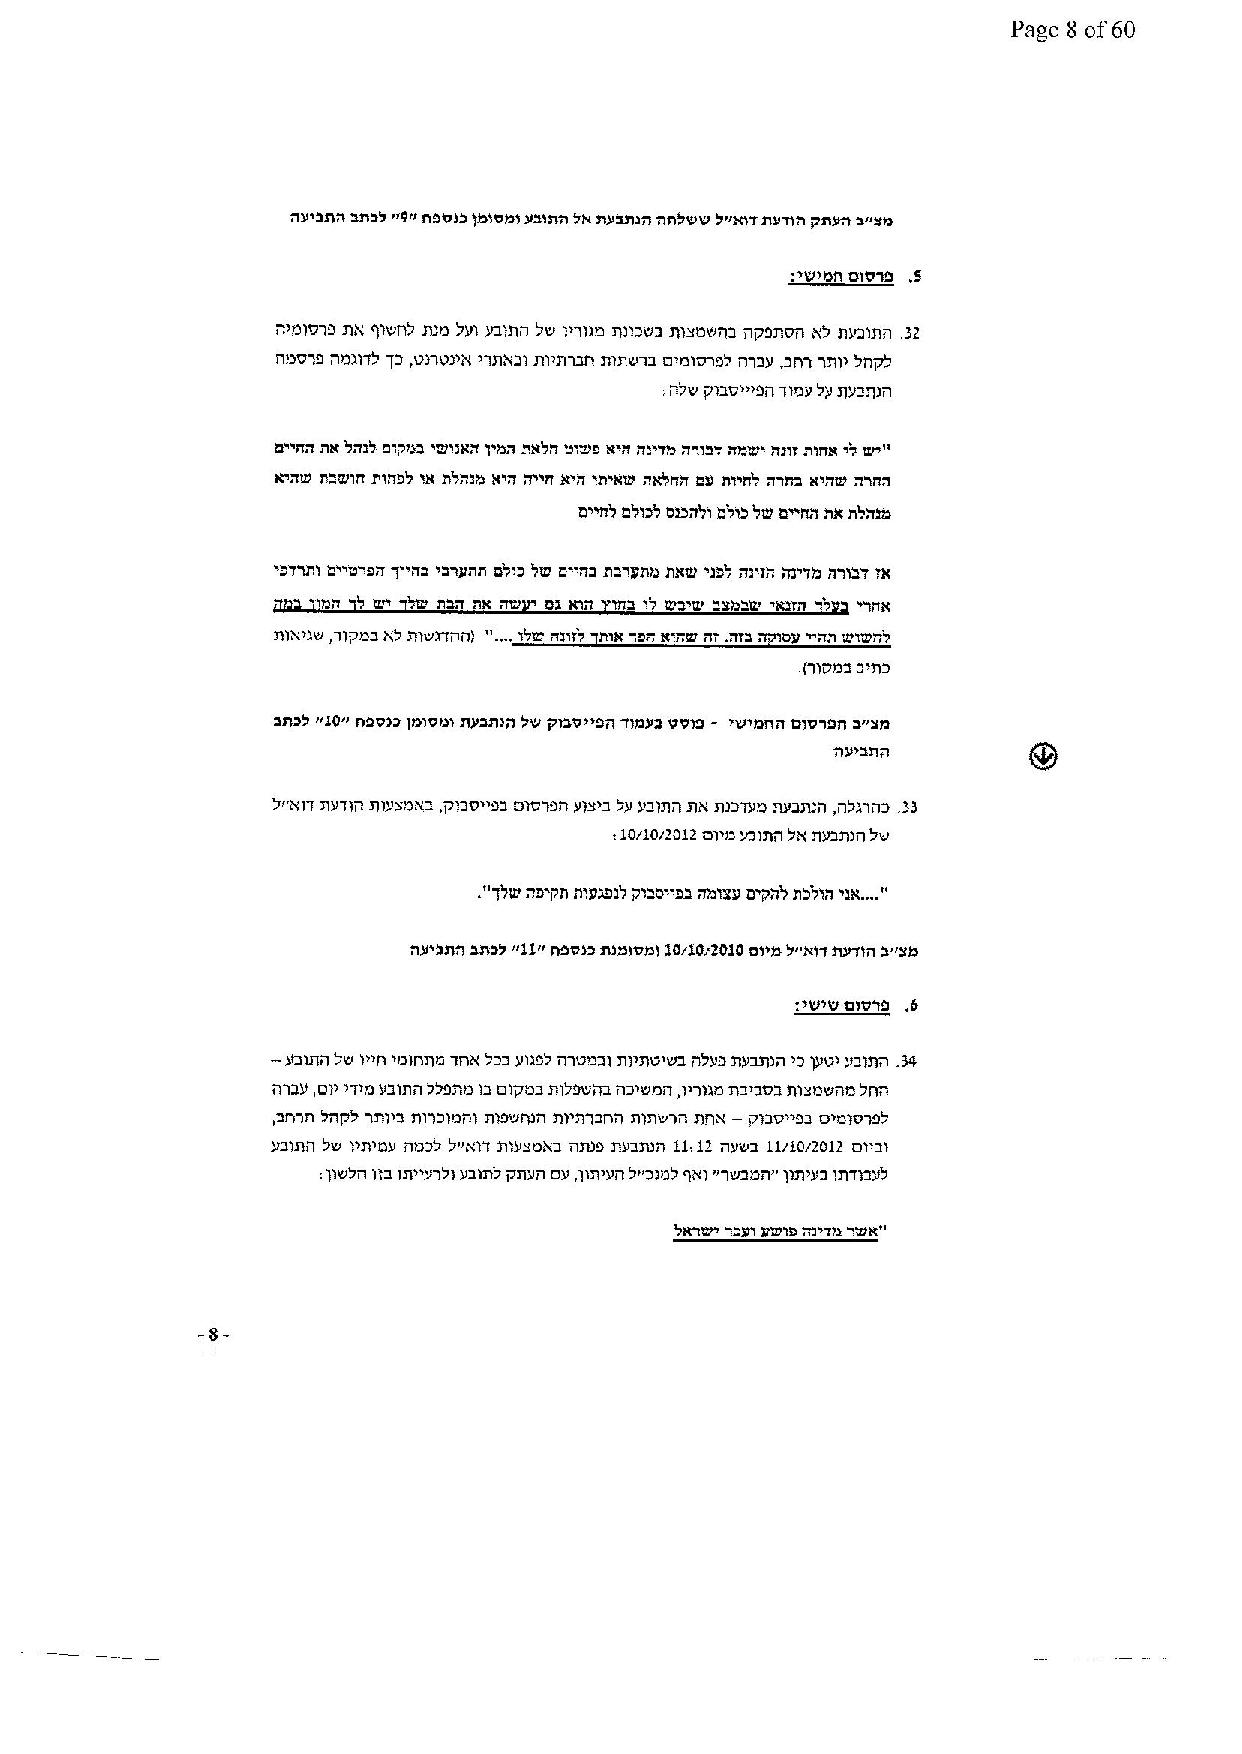 document-page-008